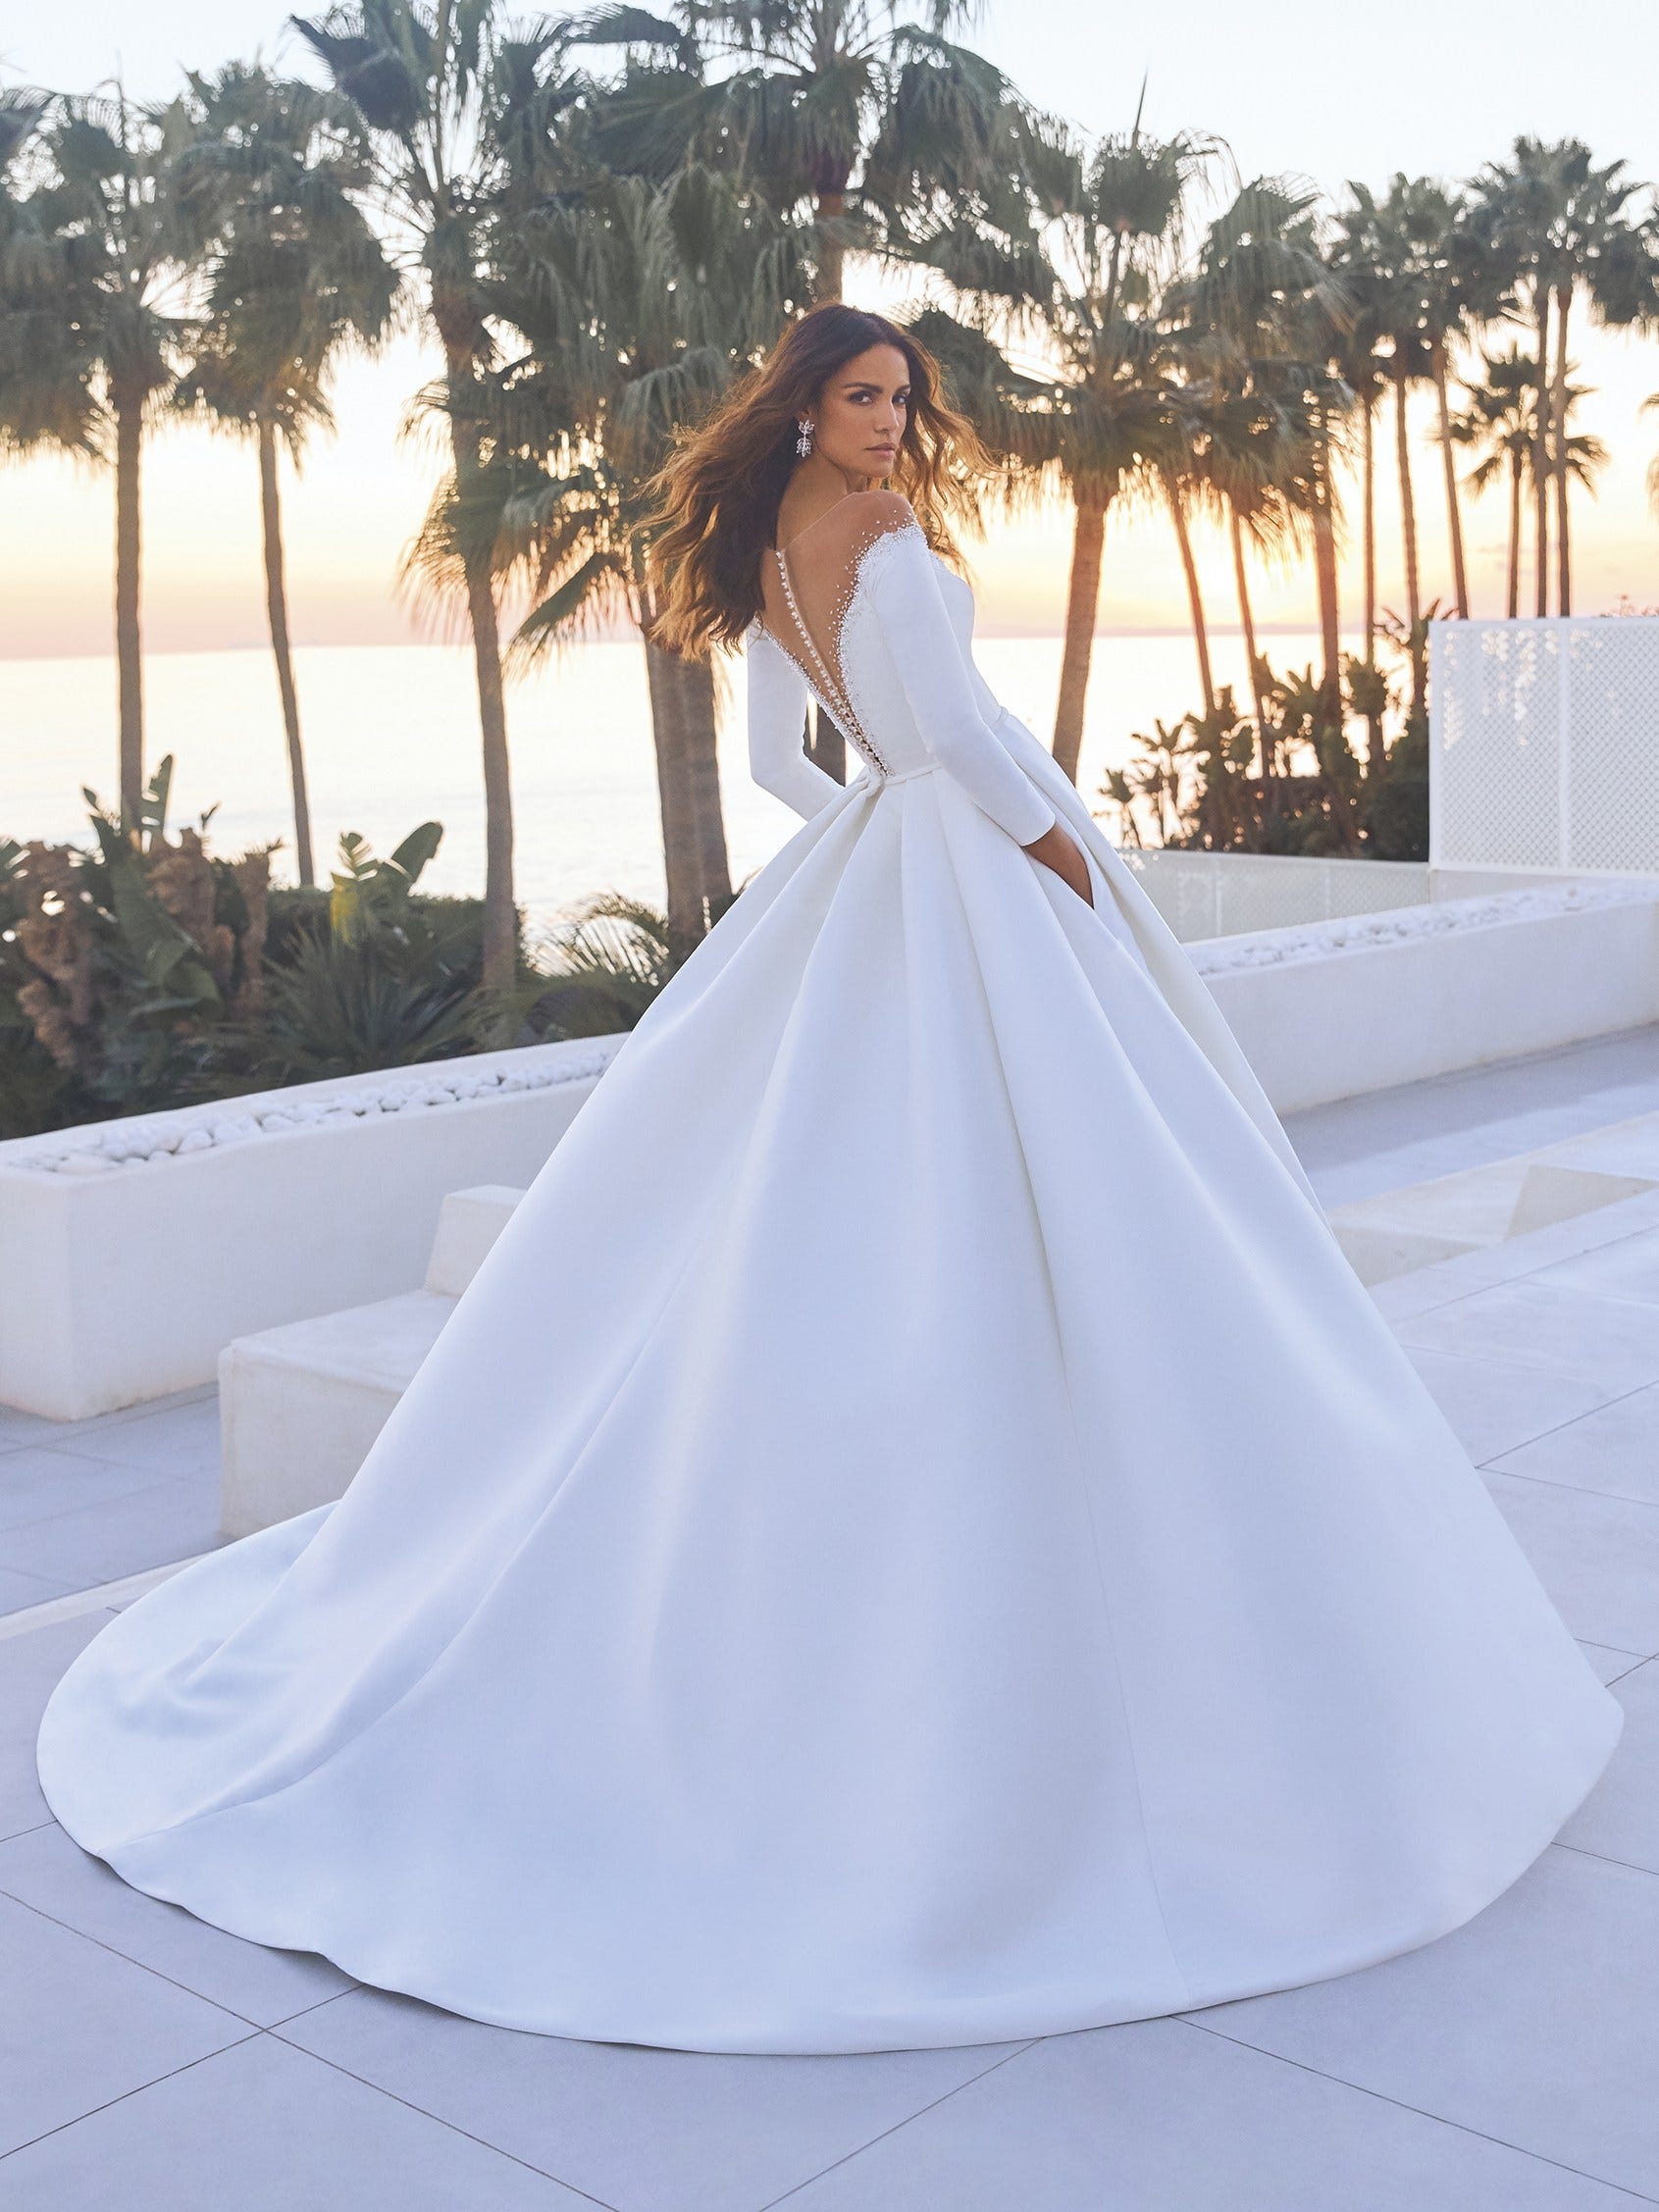 Strapless Sweetheart Satin Mermaid Gown with Illusion Back